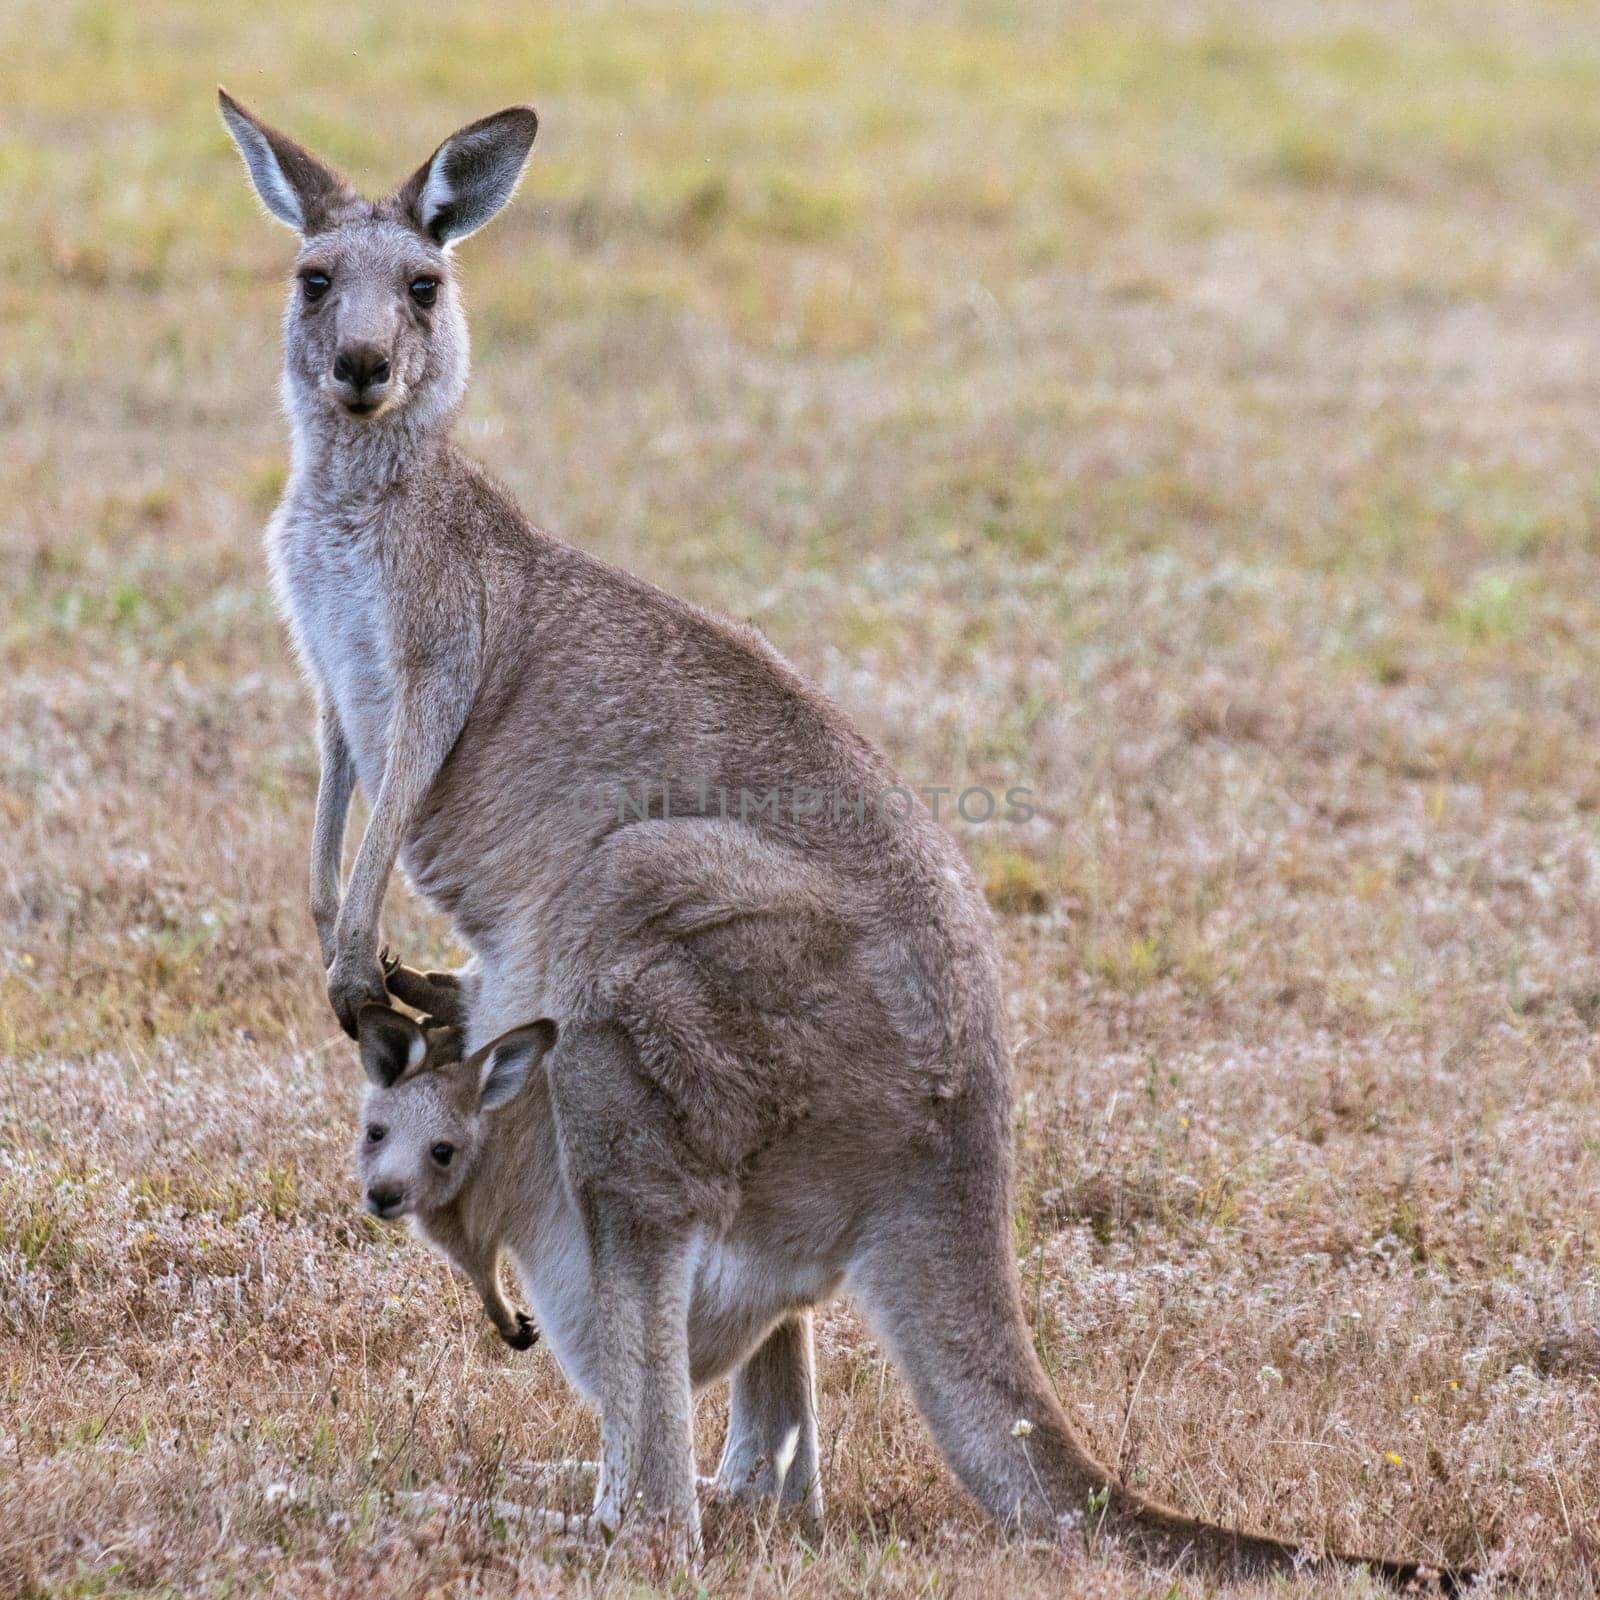 Wild Eastern grey kangaroo and adorable joey at sunset, Australia by StefanMal